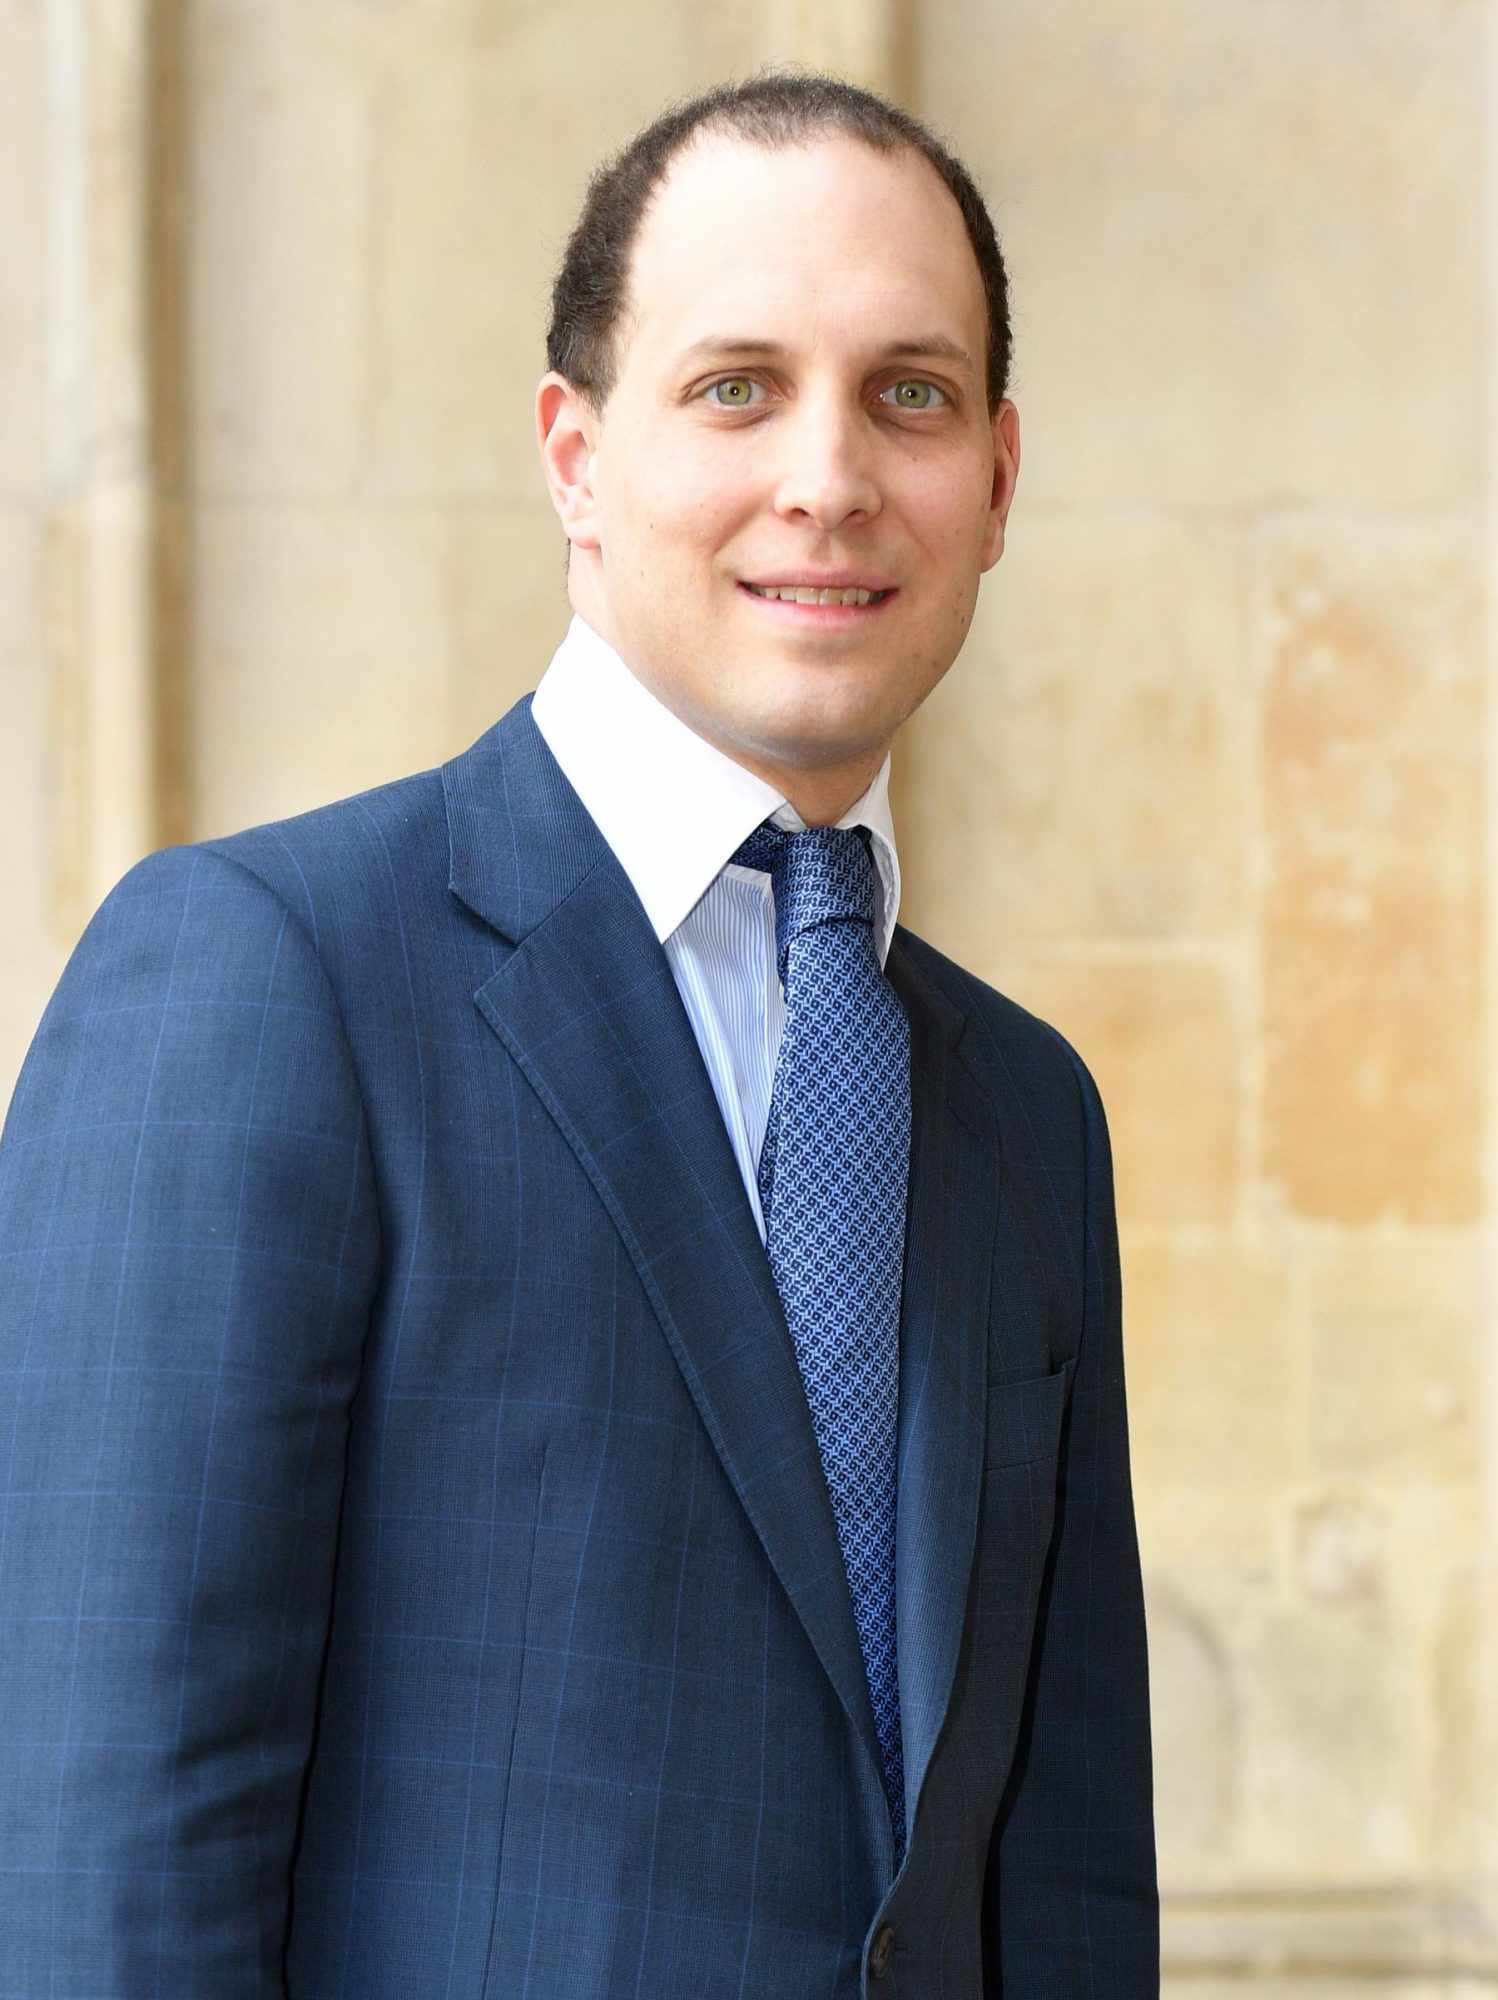 <p>The son of Prince Michael of Kent and Baroness Marie Christine von Reibnitz. He is currently 53rd in the line of succession, behind his father. </p>
                            